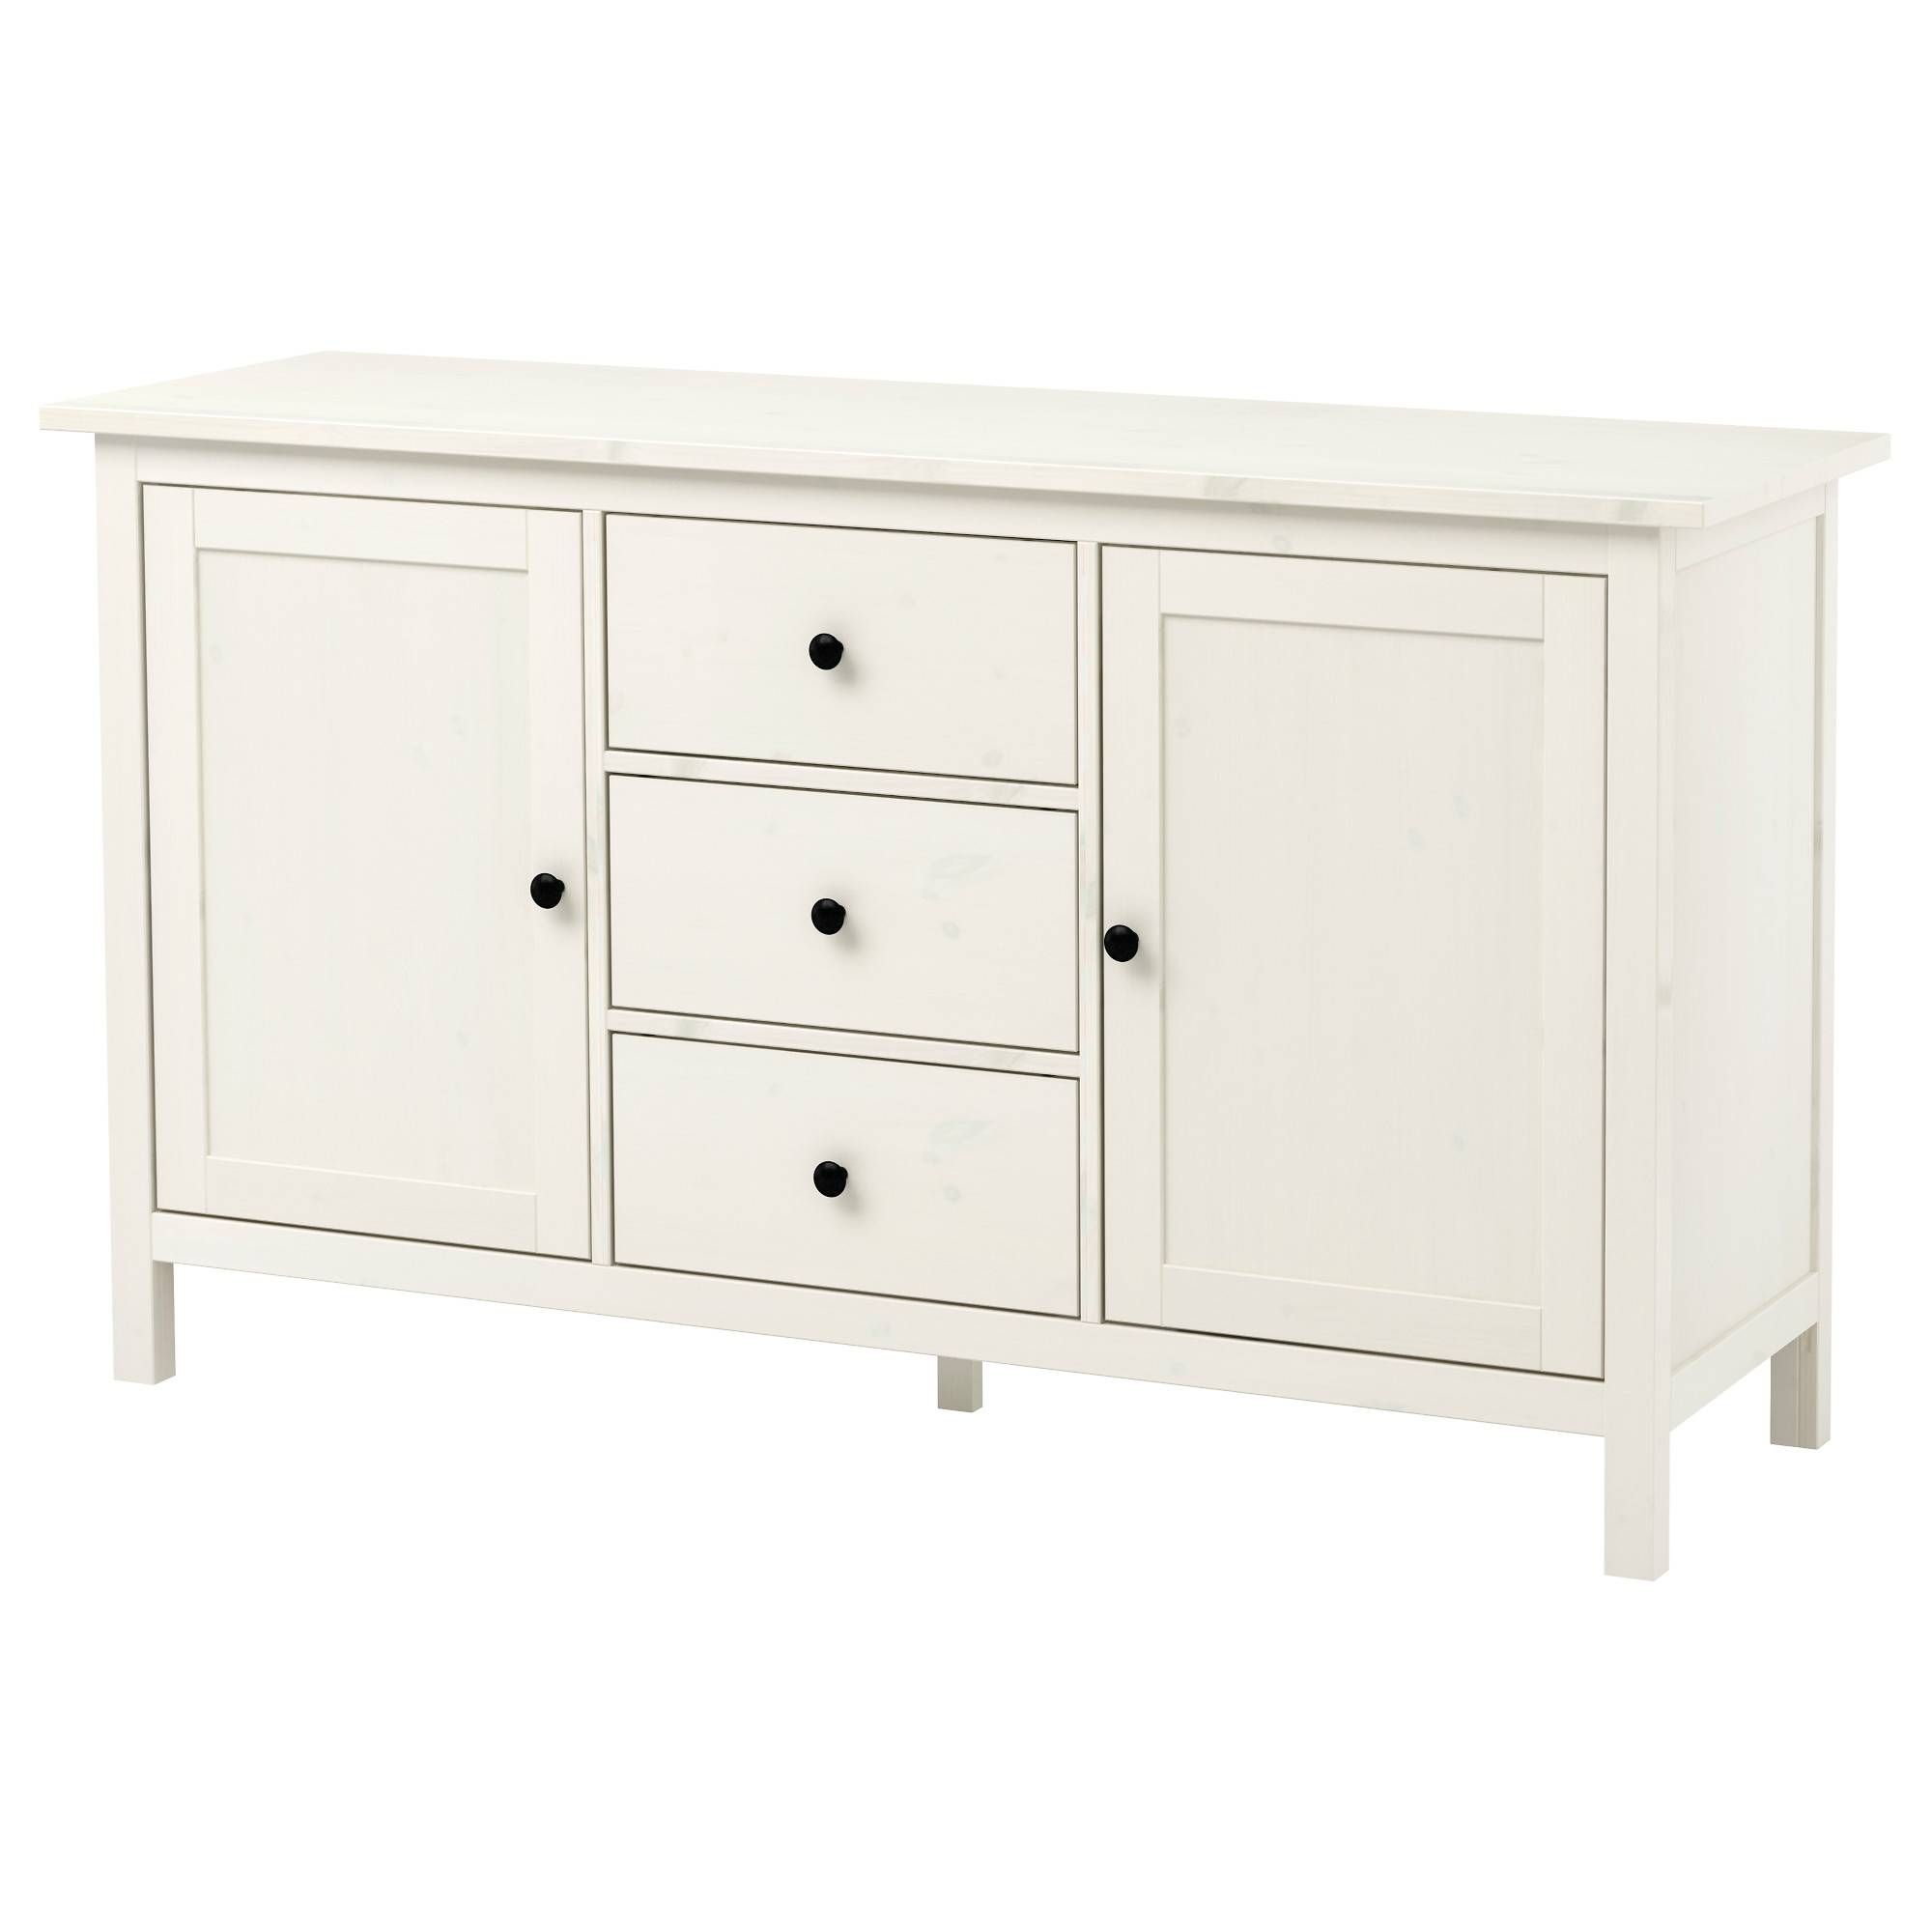 Hemnes Sideboard – White Stain – Ikea Within Narrow Sideboards And Buffets (View 7 of 15)